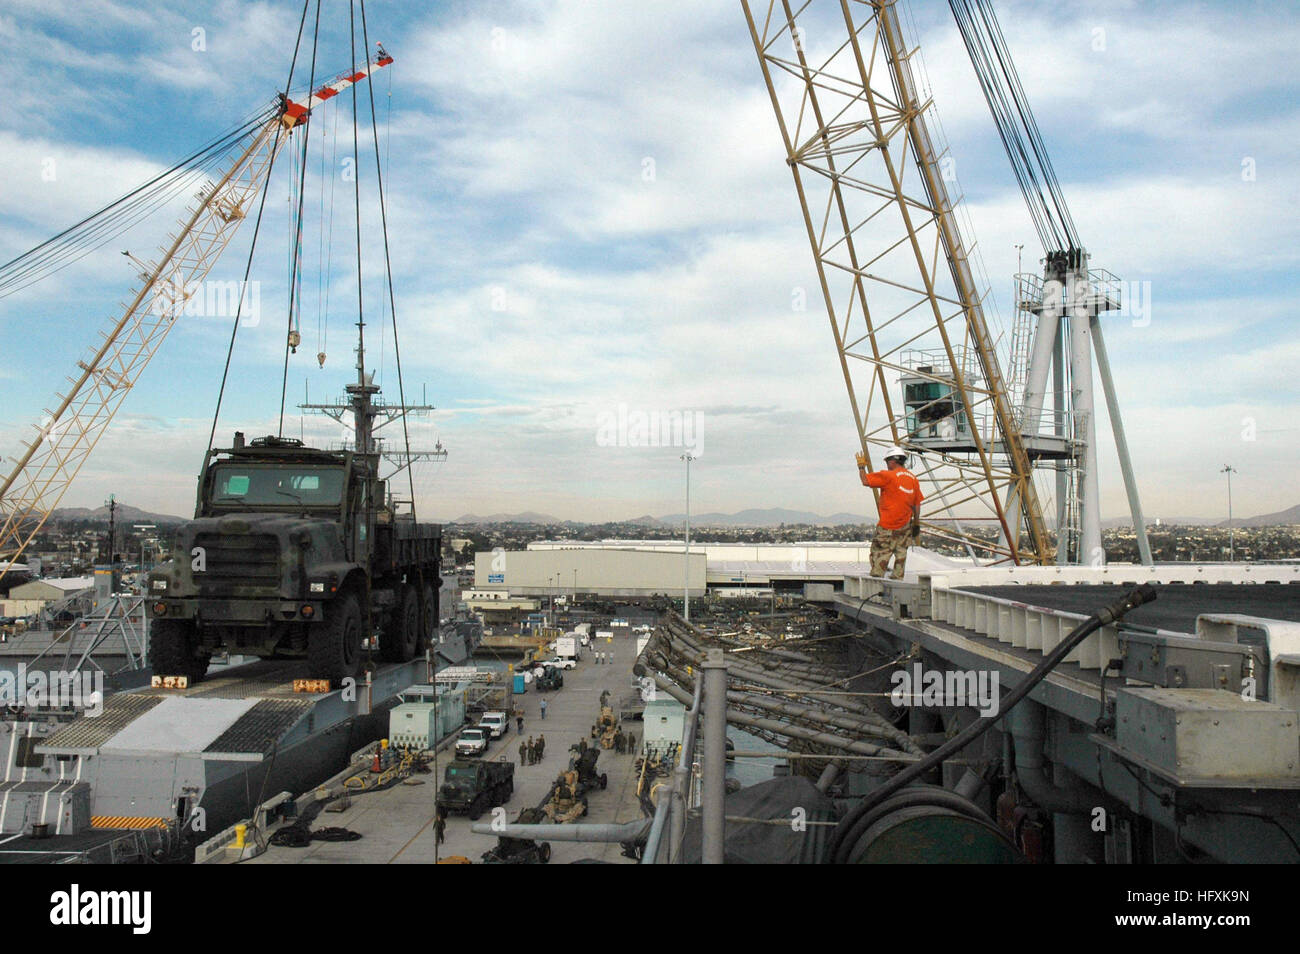 060208-N-5764B-007 San Diego (Feb. 9, 2006) - Combat Cargo Marines use a crane to load equipment onto the amphibious assault ship USS Peleliu (LHA 5) for a scheduled deployment in support of the global war on terrorism. U.S. Navy photo by Lithographer 1st Class John Banfield (RELEASED) US Navy 060208-N-5764B-007 Combat Cargo Marines use a crane to load equipment onto the amphibious assault ship USS Peleliu (LHA 5) for a scheduled deployment in support of the global war on terrorism Stock Photo